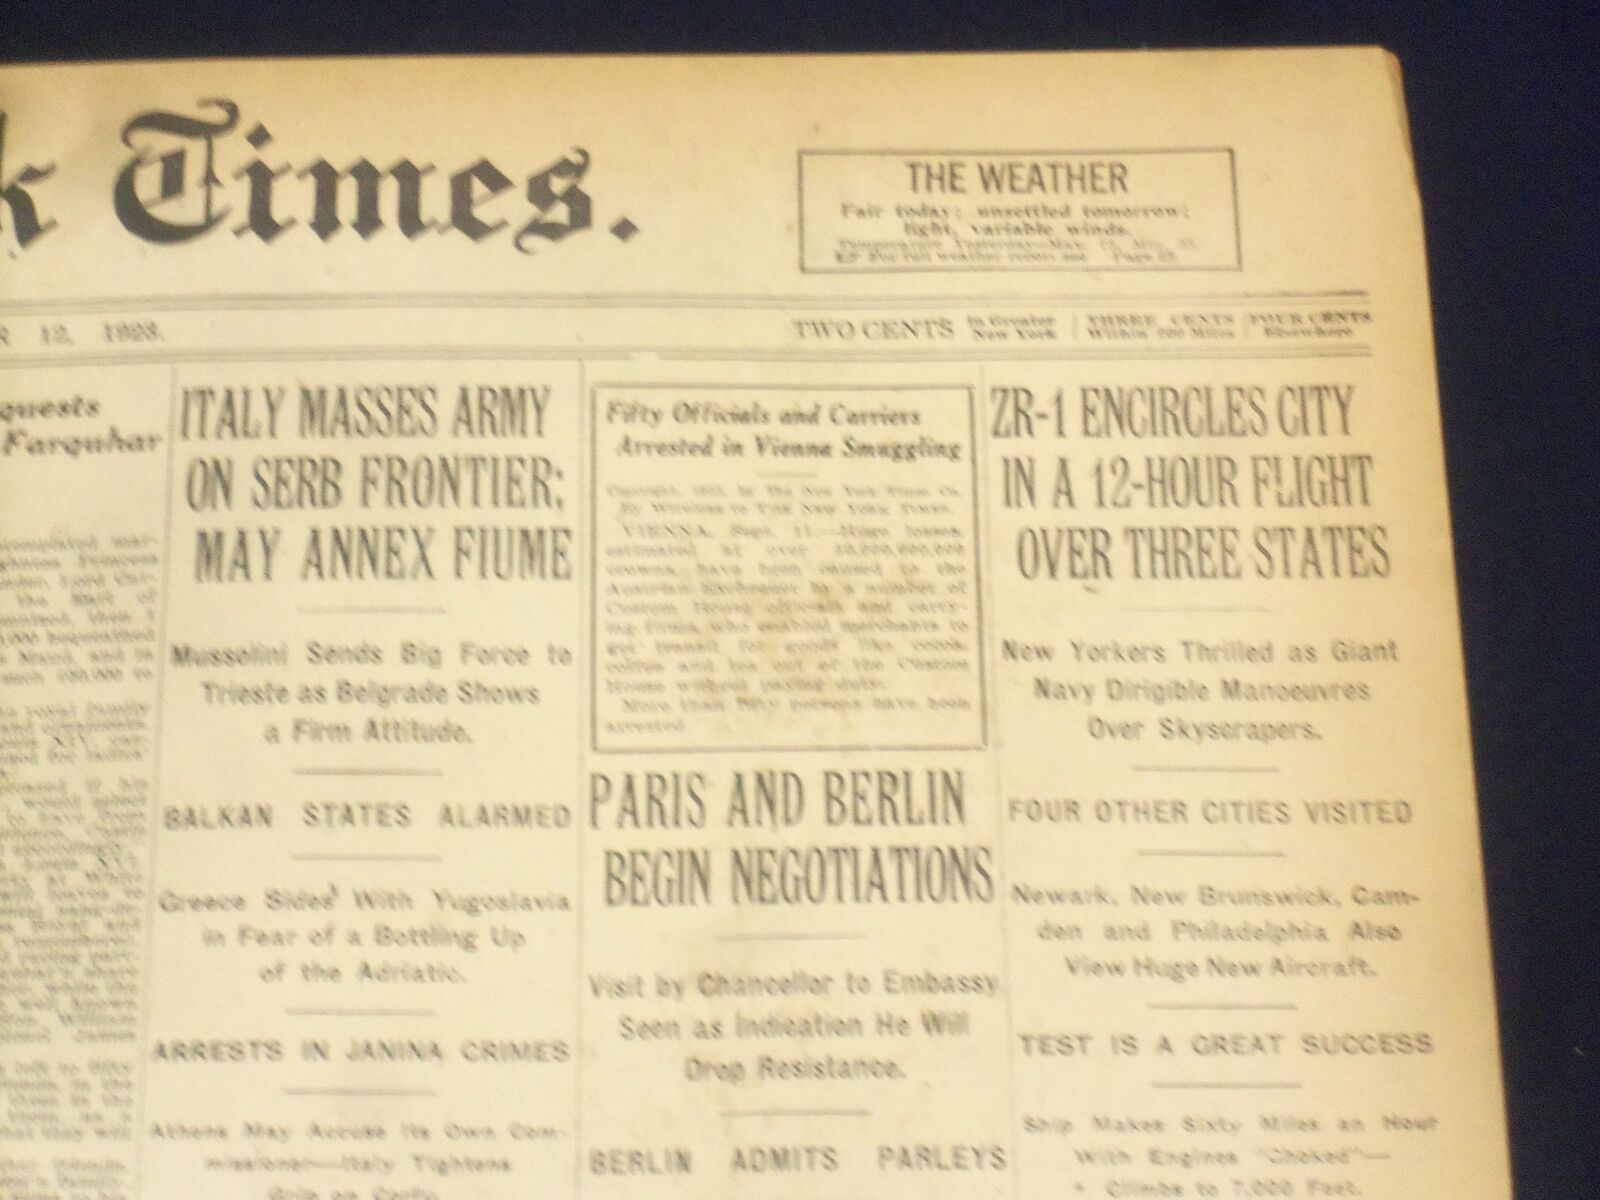 1923 SEP 12 NEW YORK TIMES - ZR-1 ENCIRCLES CITY IN 12 HOUR FIGHT - NT 9356